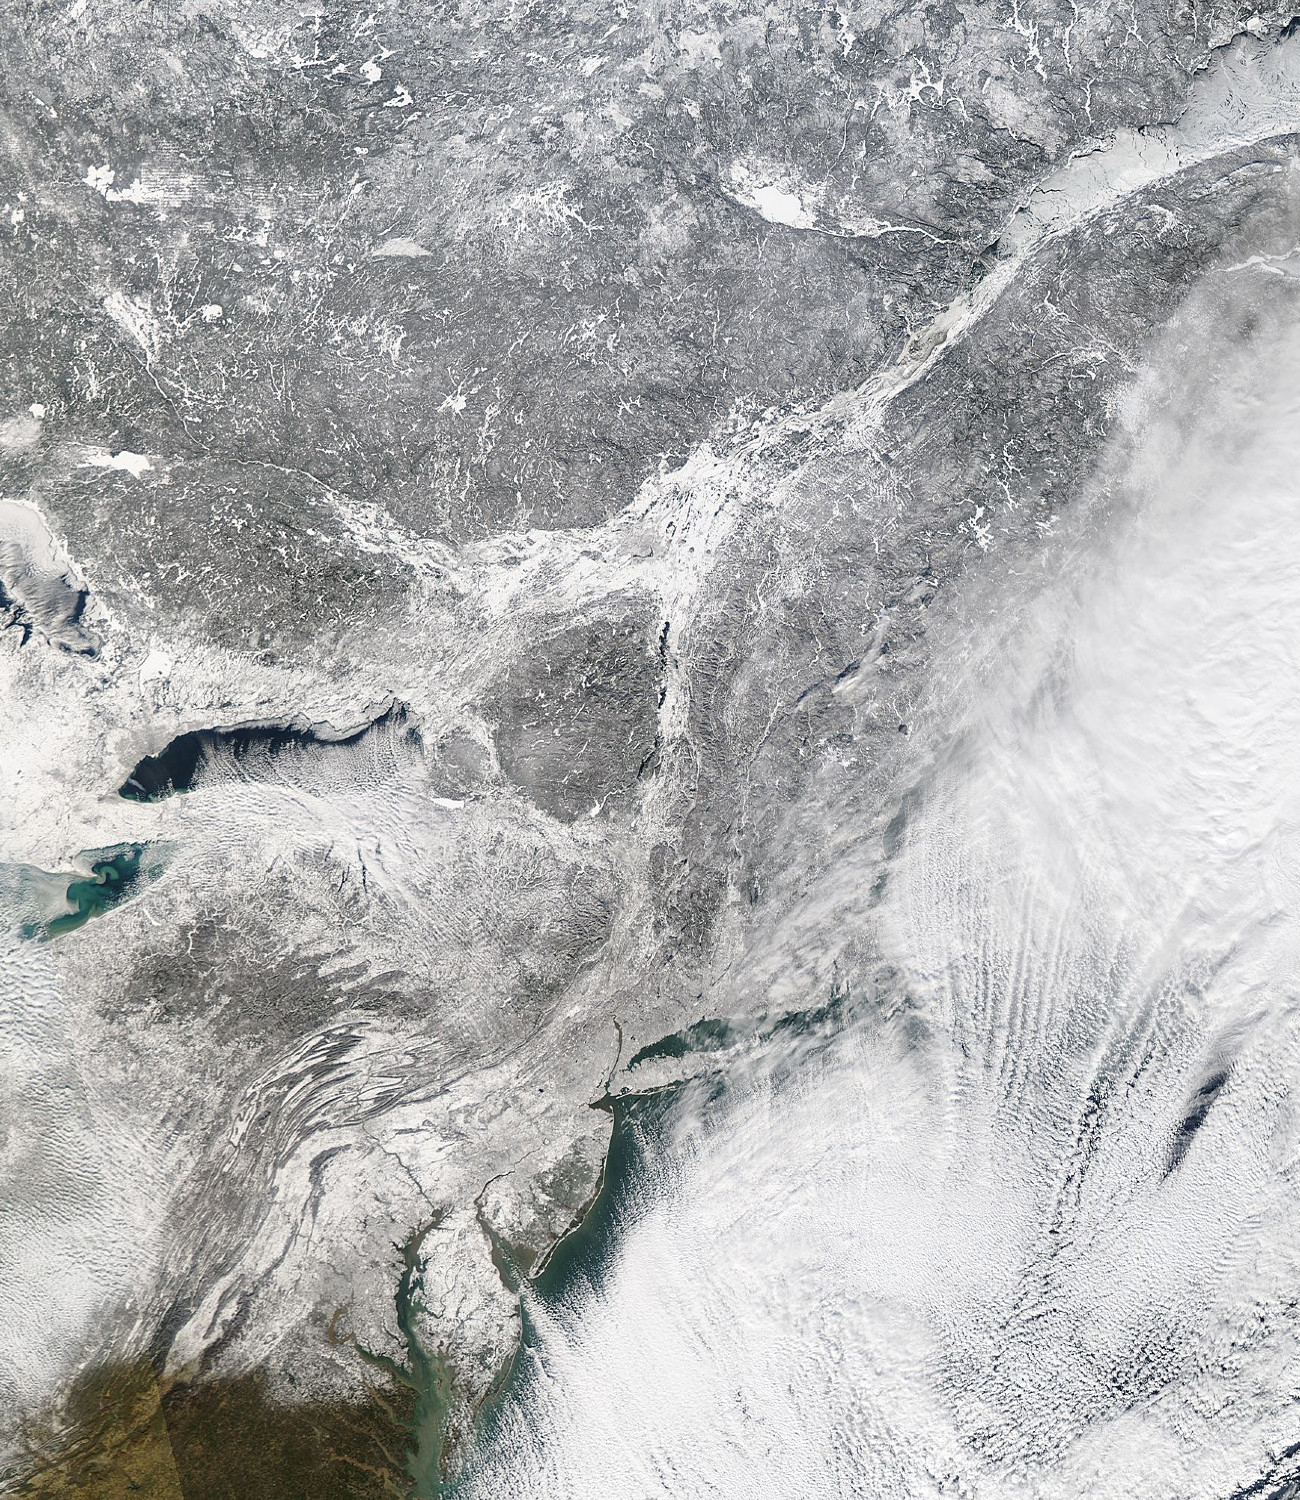 Watch How America Is Getting Frozen In This Timelapse From Space